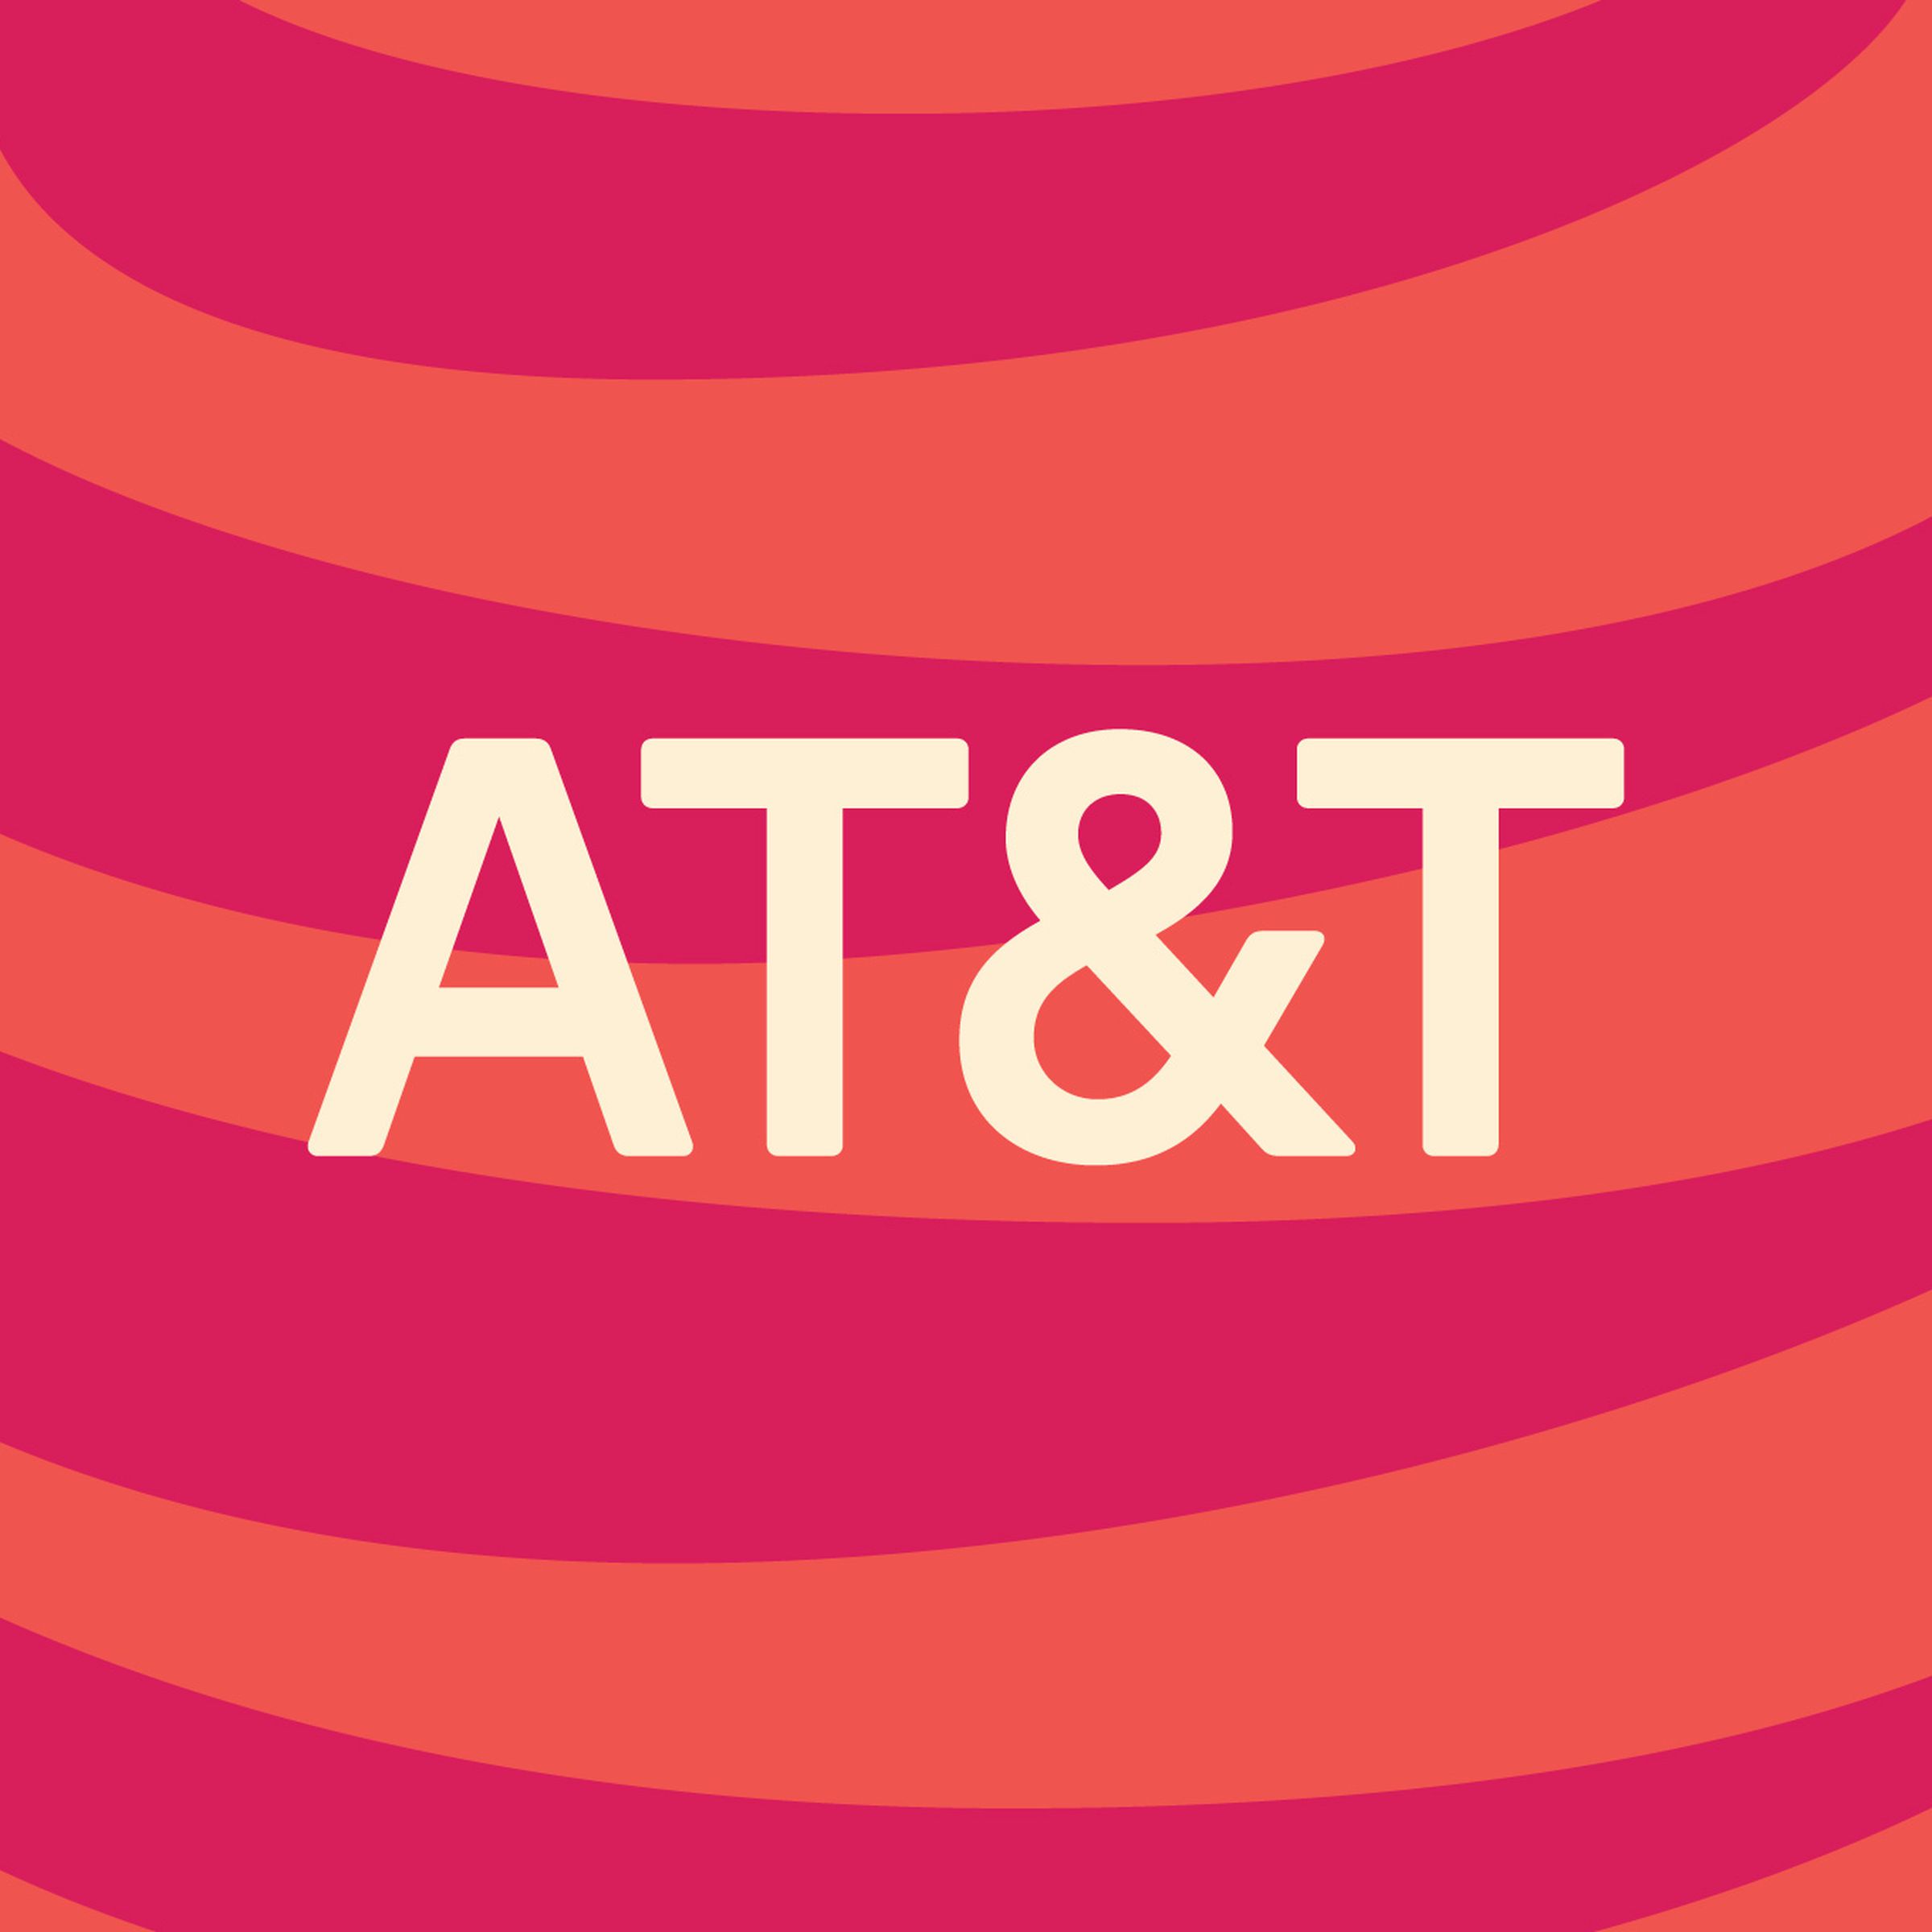 AT&amp;T logo with illustrated red and orange background.